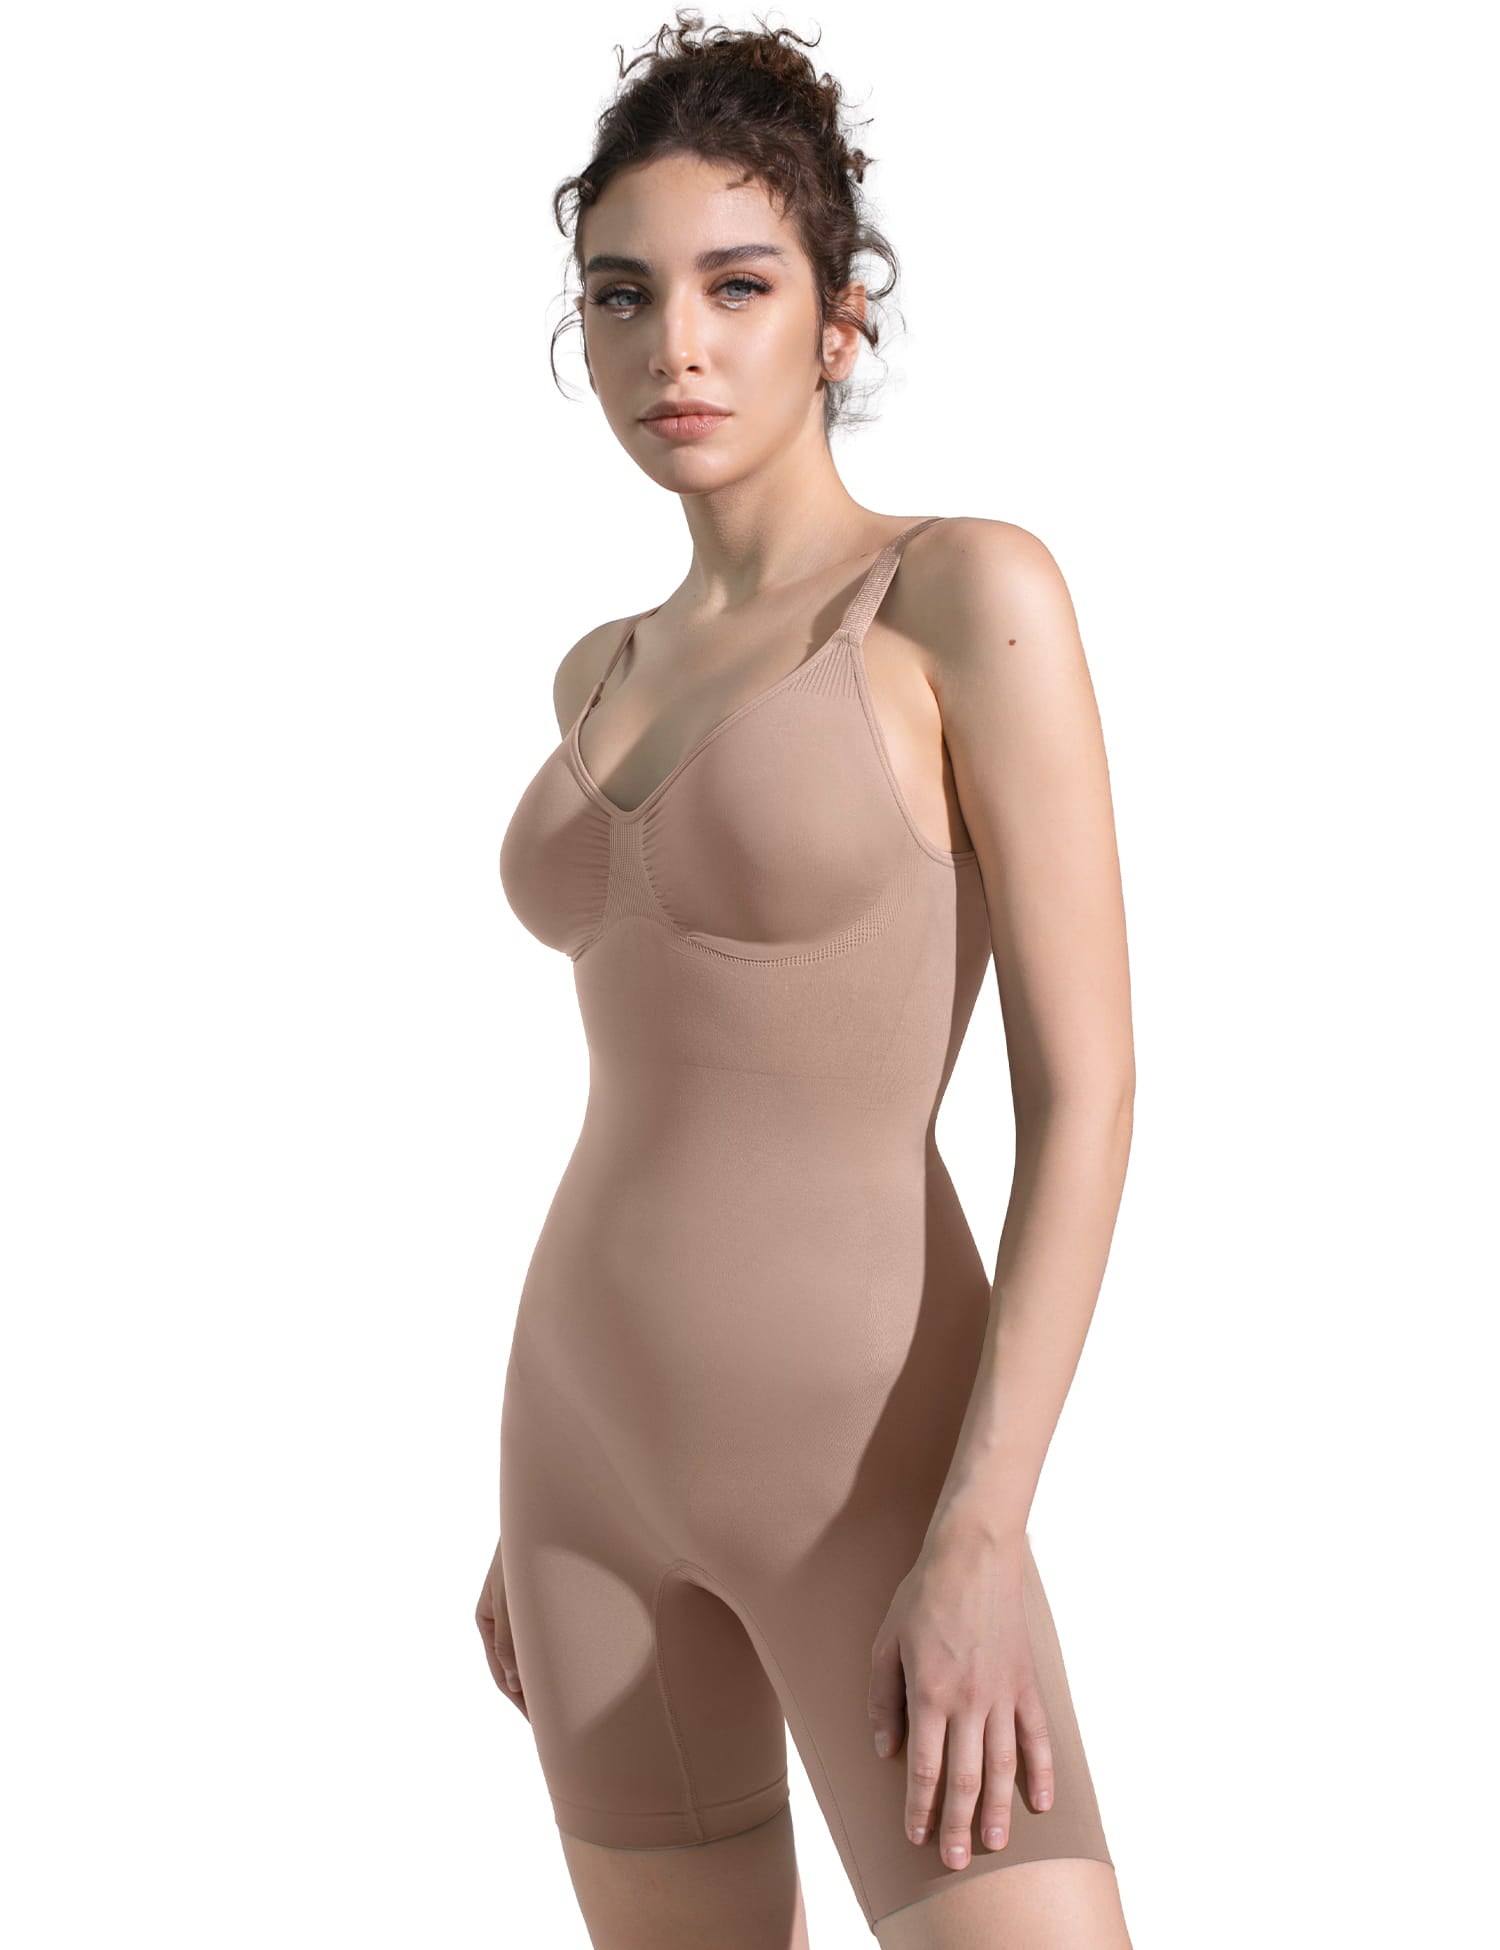 PUMIEY Shapewear Bodysuit for Women Tummy Control V-Neck With Open Gusset  Hourglass Collection